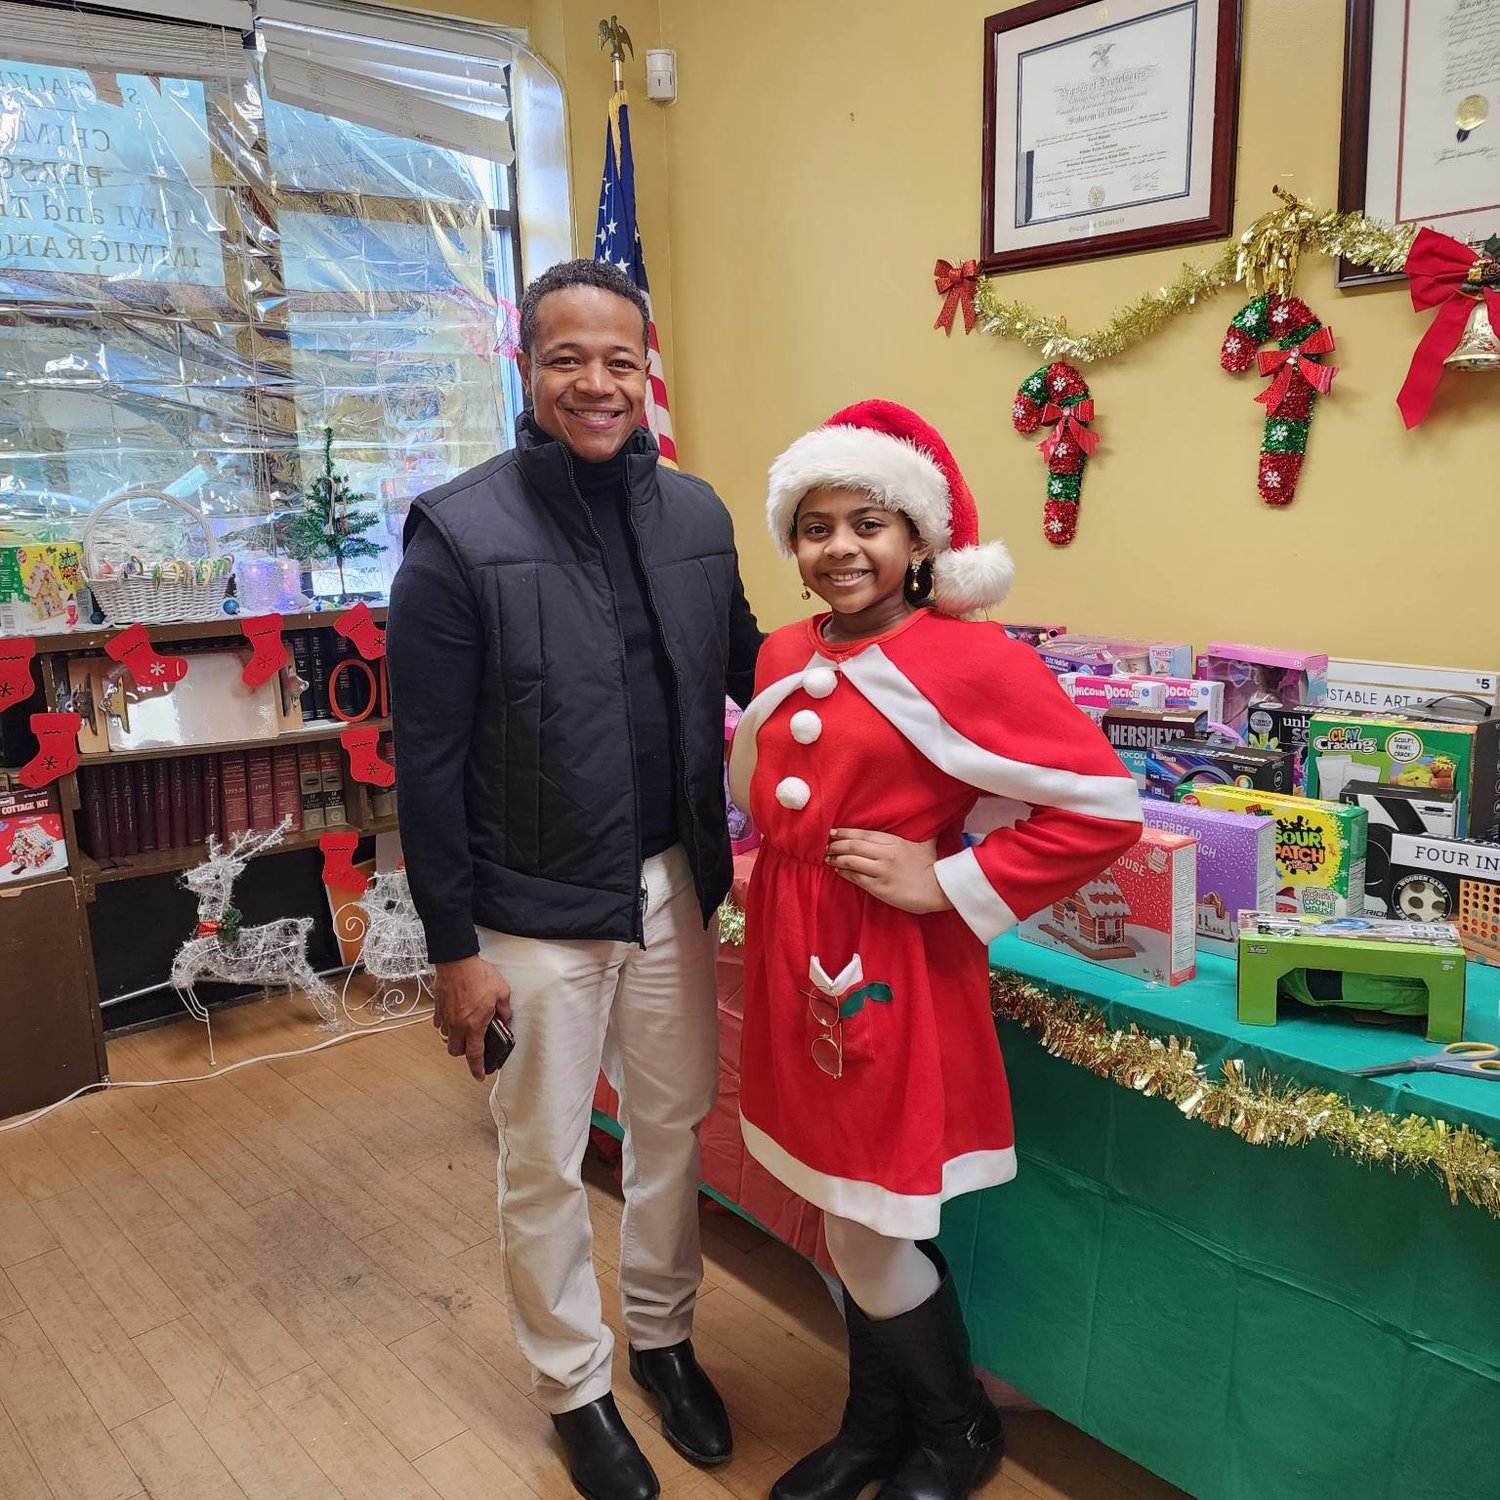 Nassau county Legislator Carrié Solages and Selene Ferdinand handed out holiday gifts to children in Elmont on Dec. 10.